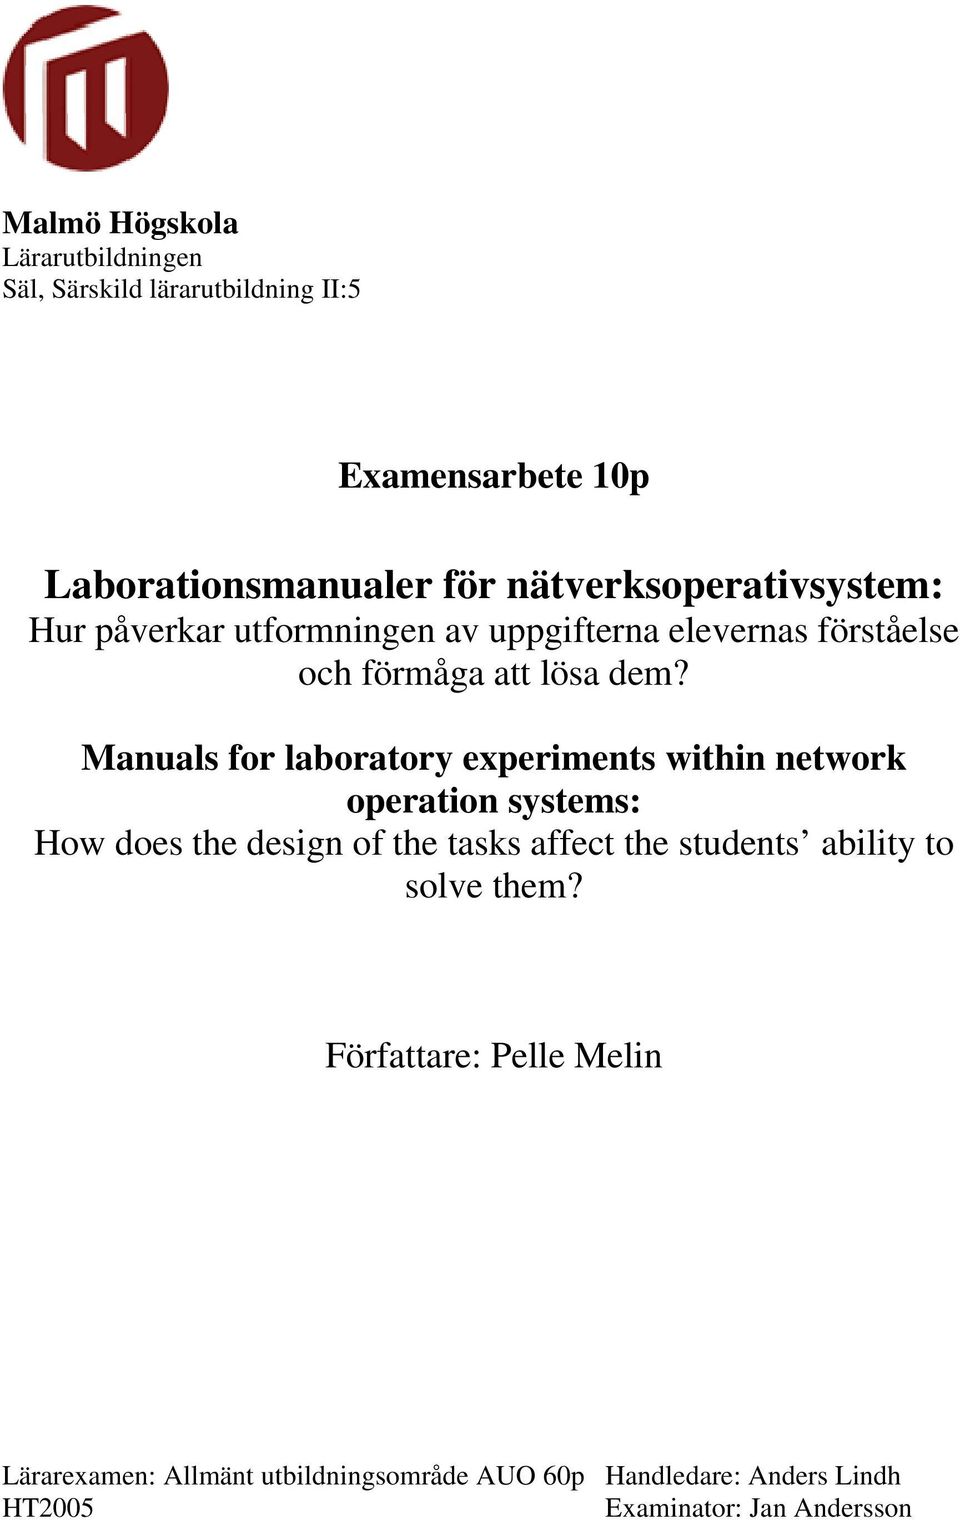 Manuals for laboratory experiments within network operation systems: How does the design of the tasks affect the students